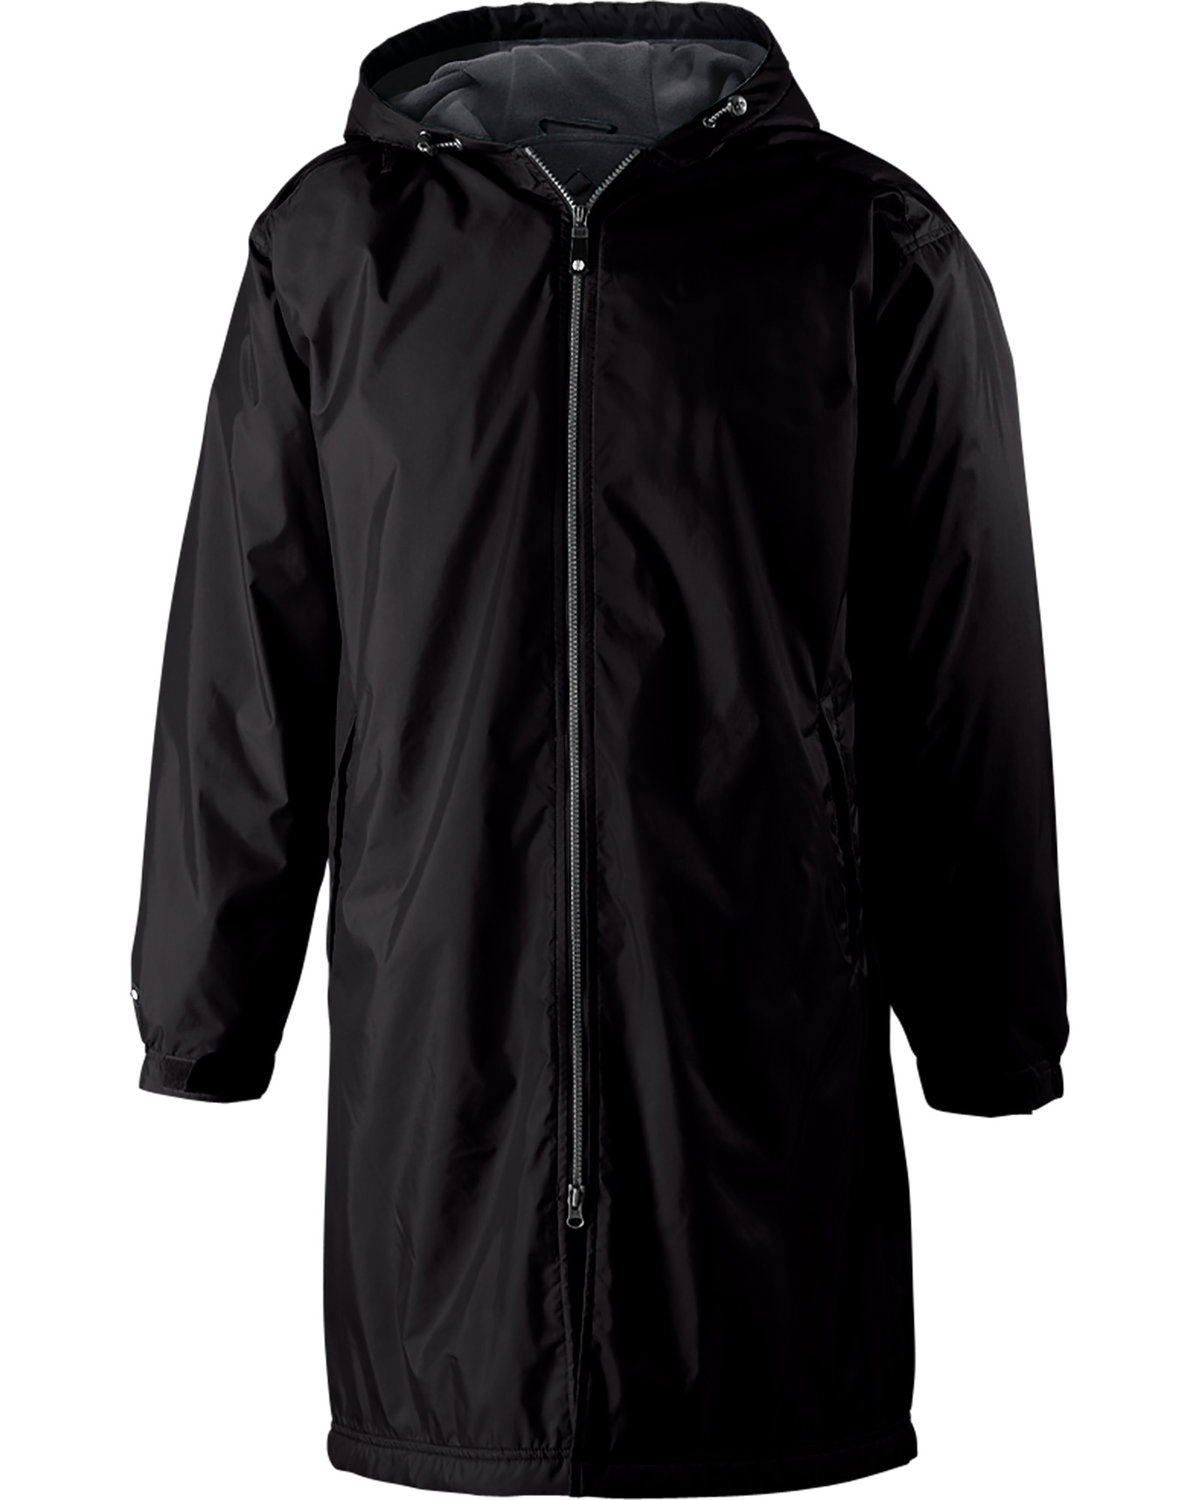 Adult Polyester Full Zip Conquest Jacket-